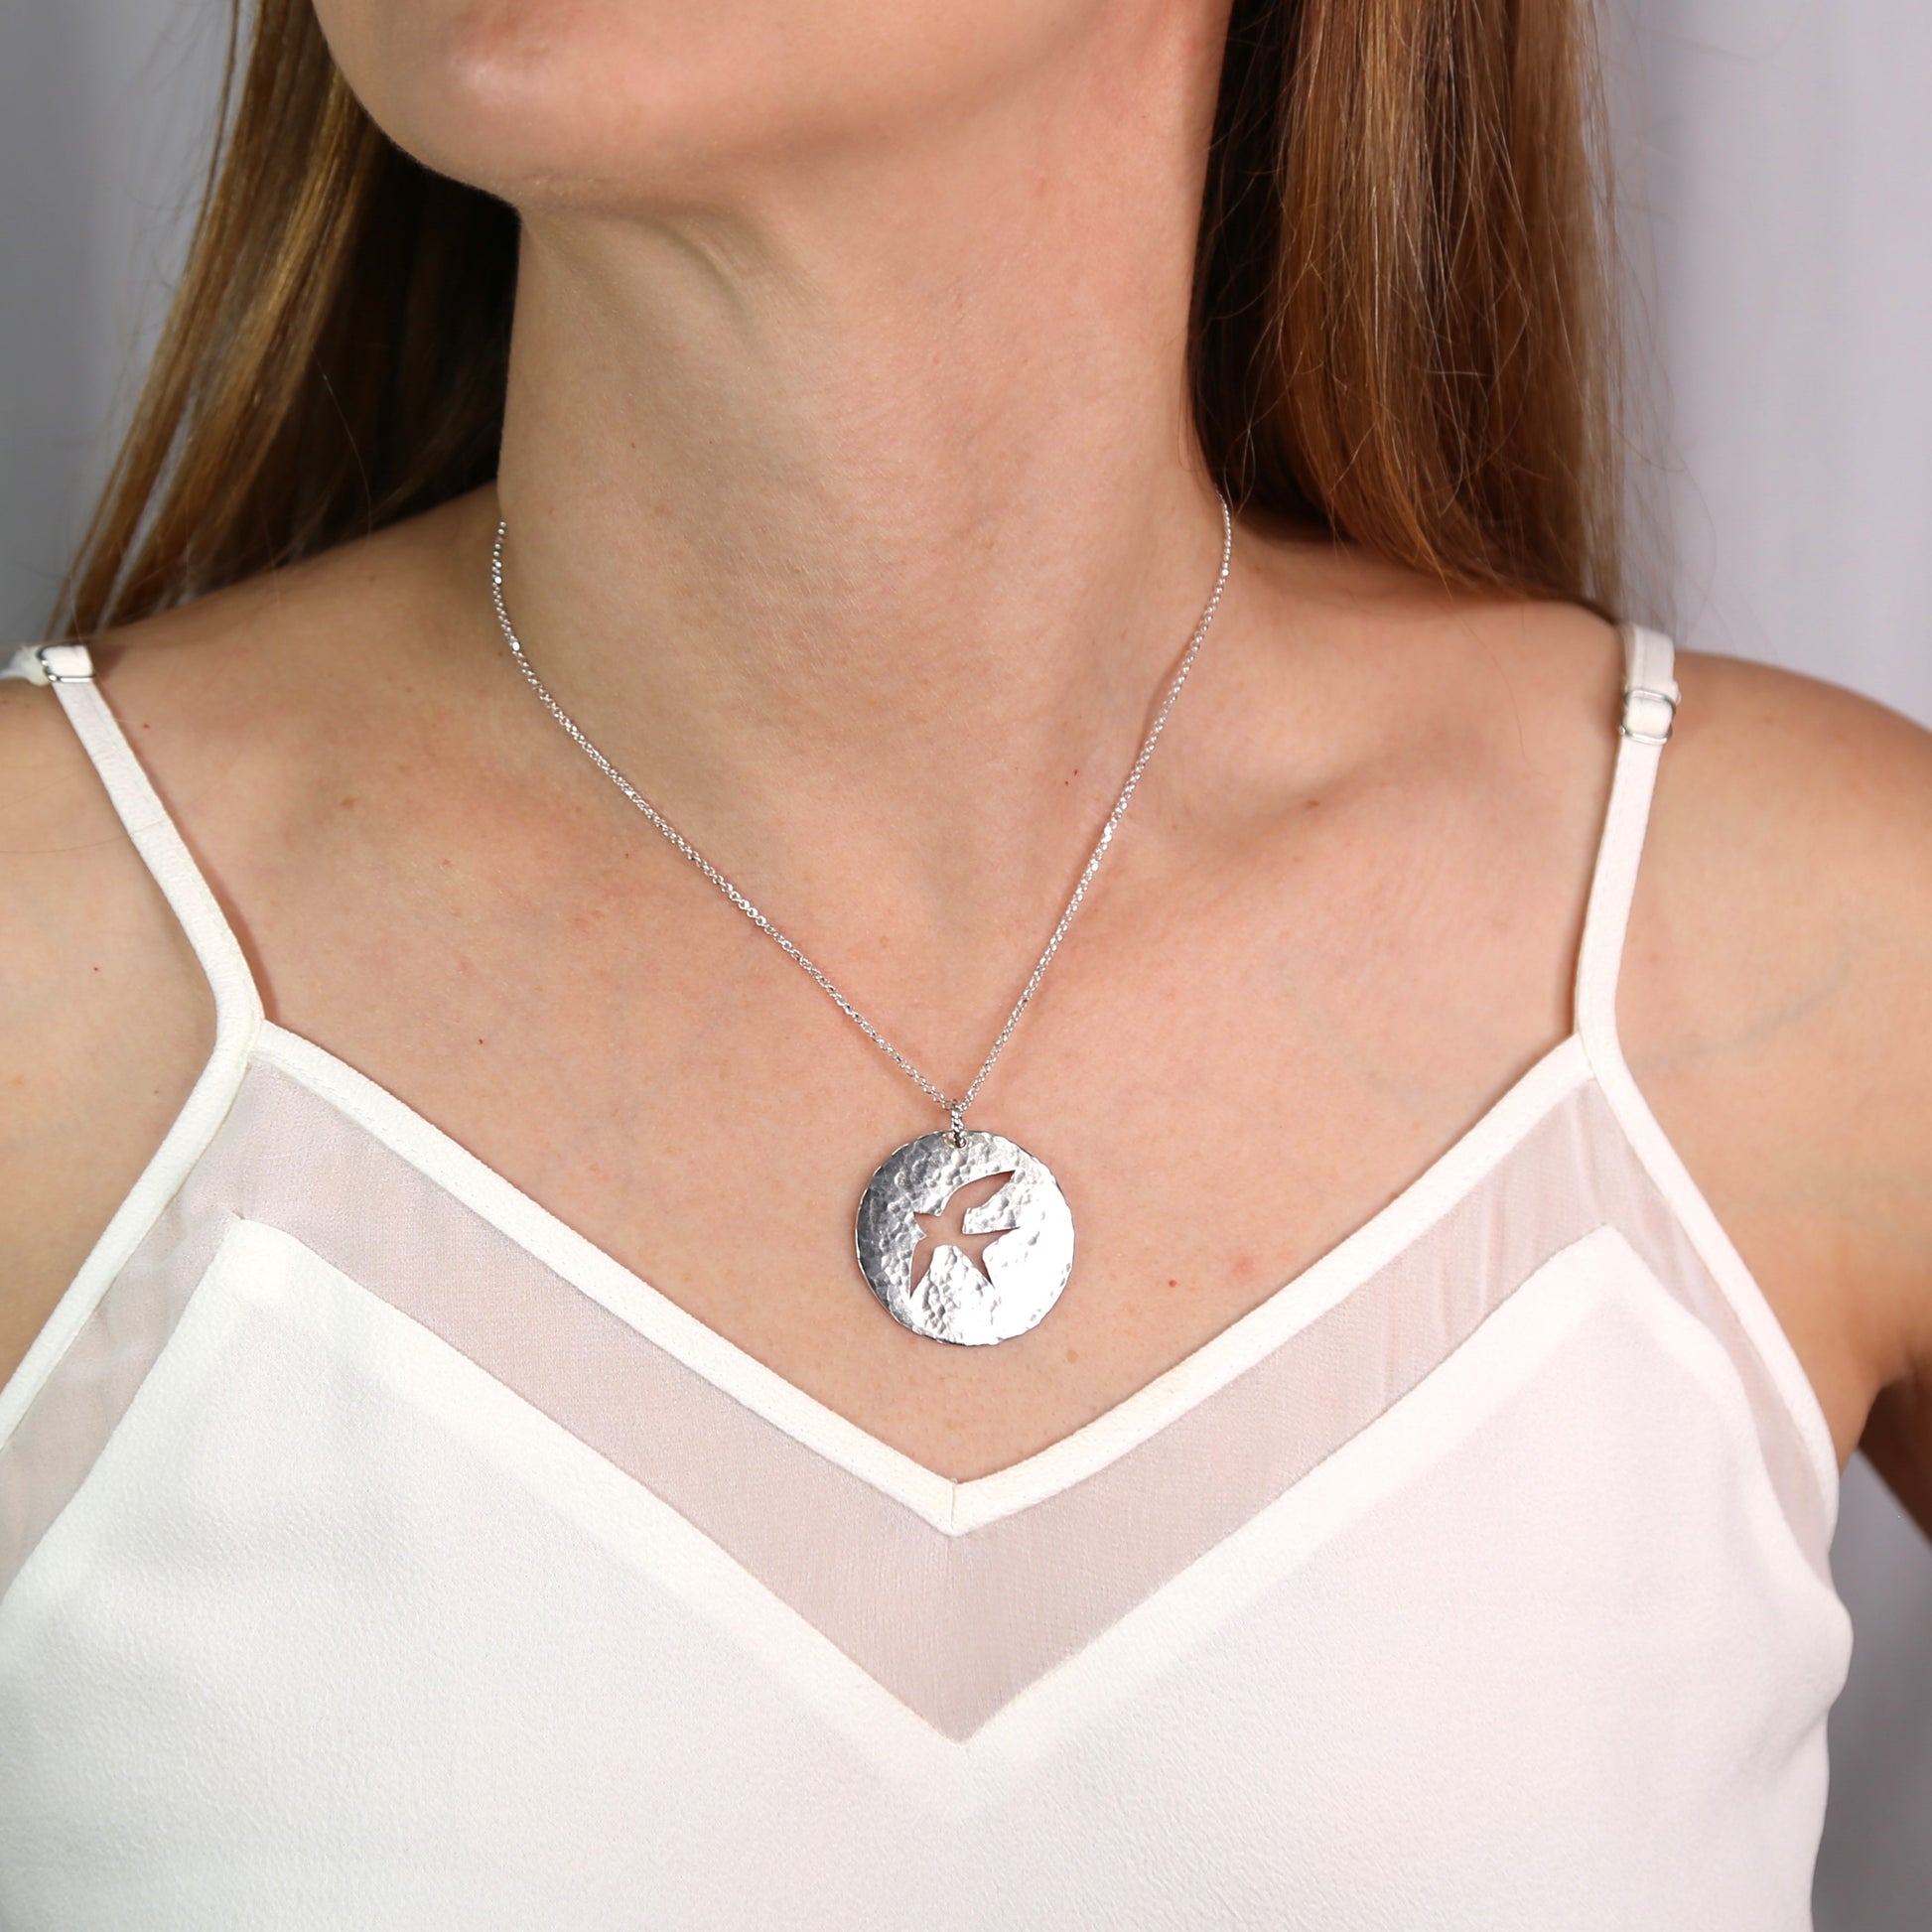 Bird in Flight - Hand-Cut and Hammered Circle Sterling Silver Pendant Necklace - Bird Silhouette 